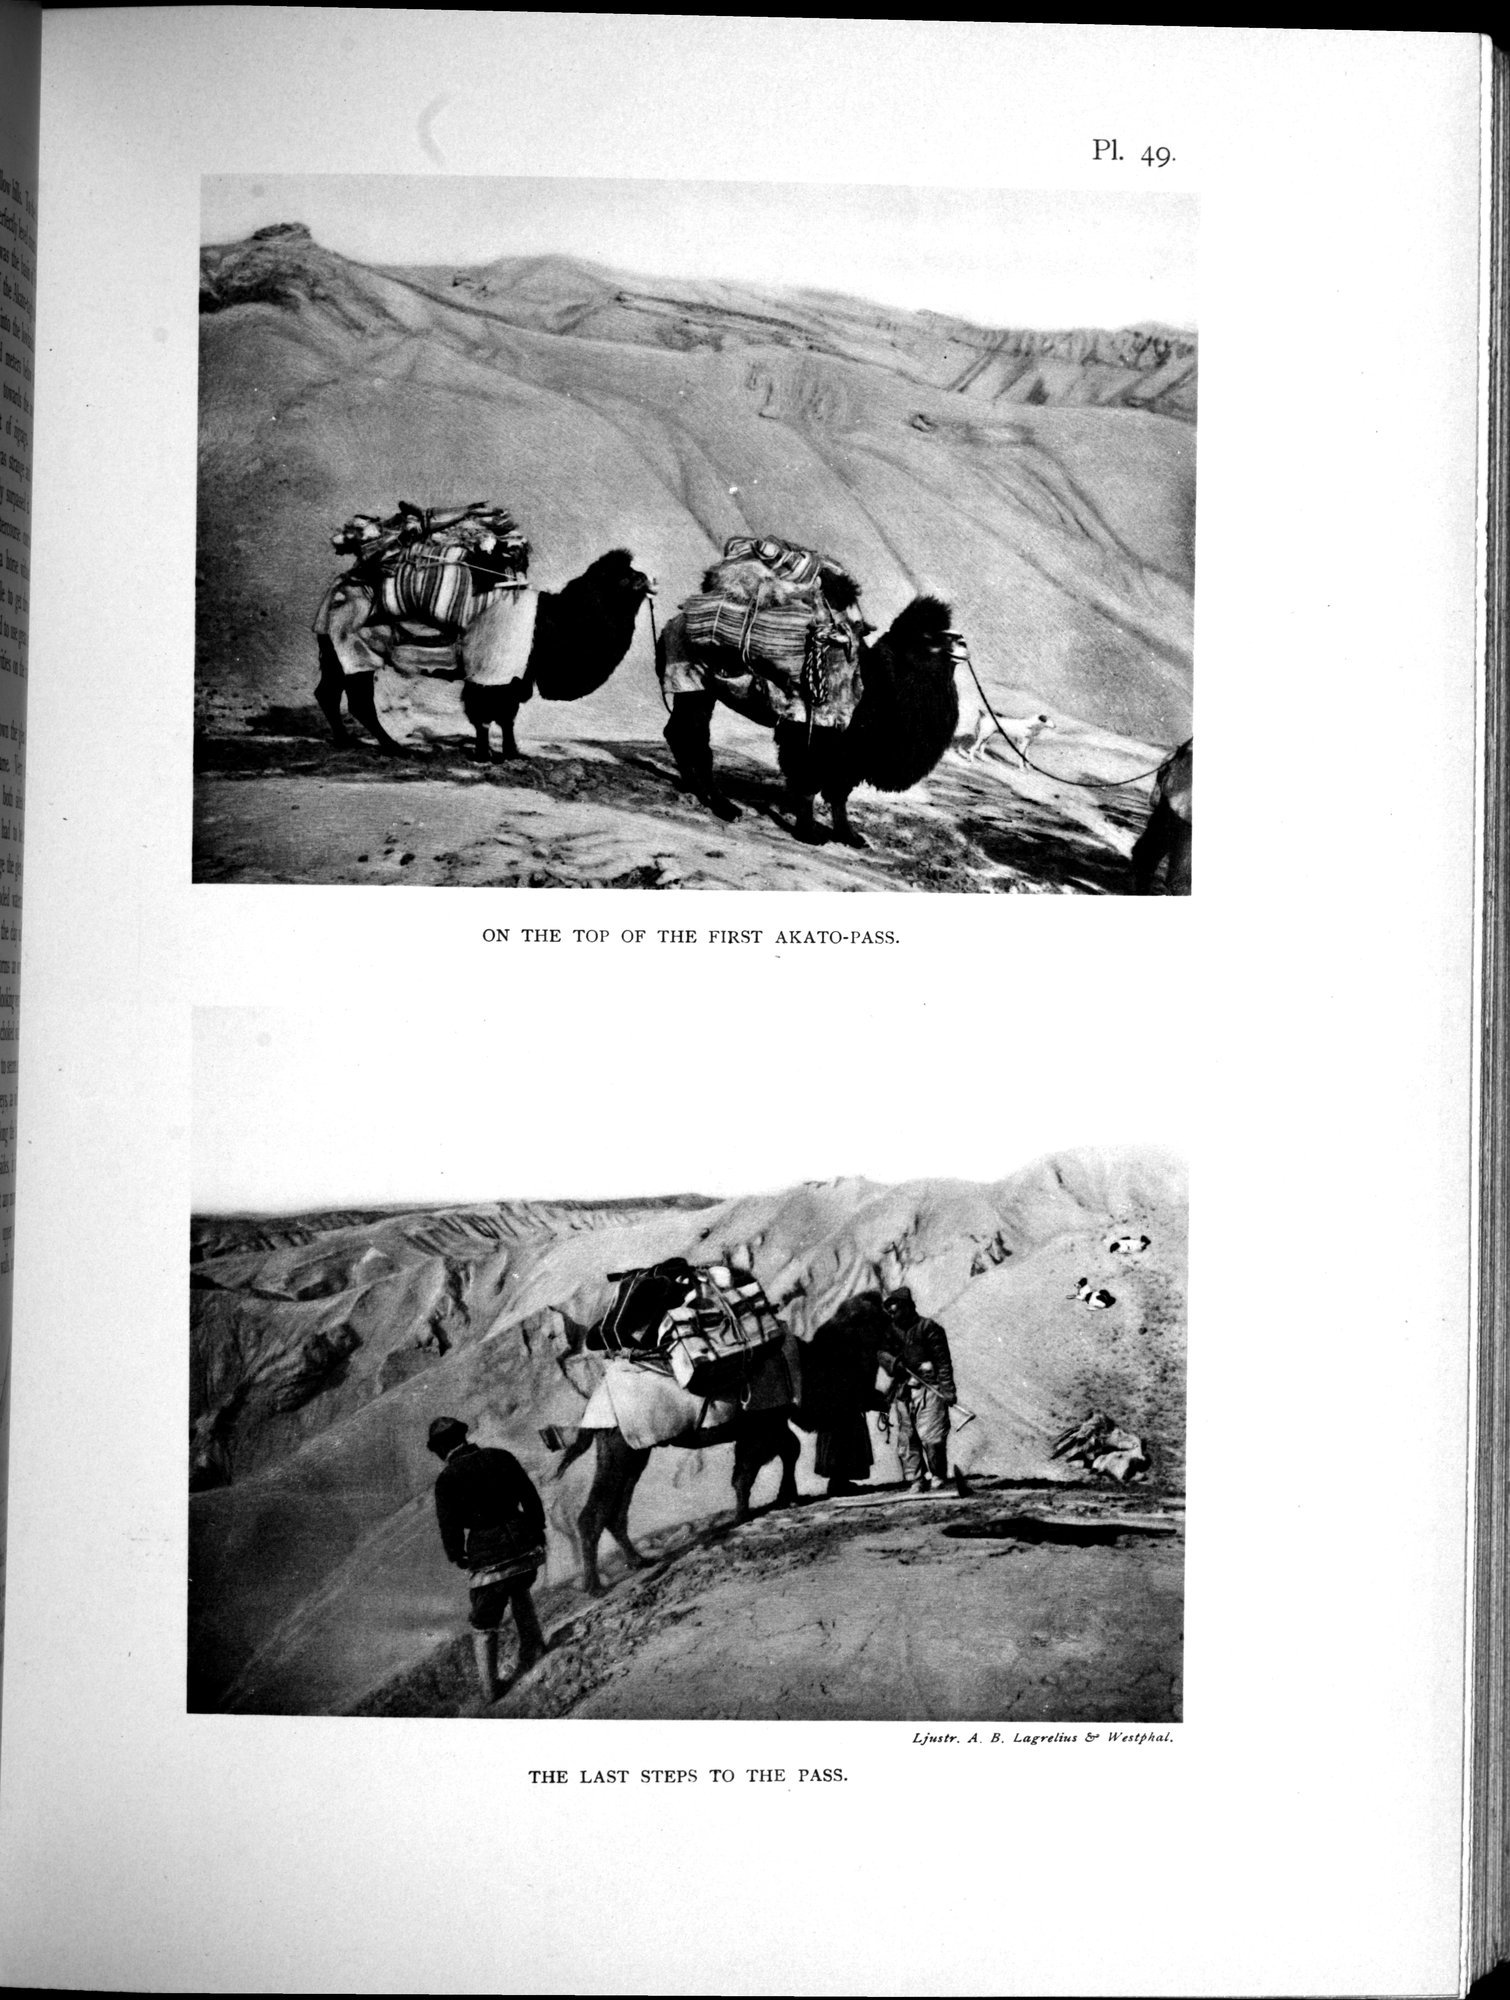 Scientific Results of a Journey in Central Asia, 1899-1902 : vol.3 / 421 ページ（白黒高解像度画像）